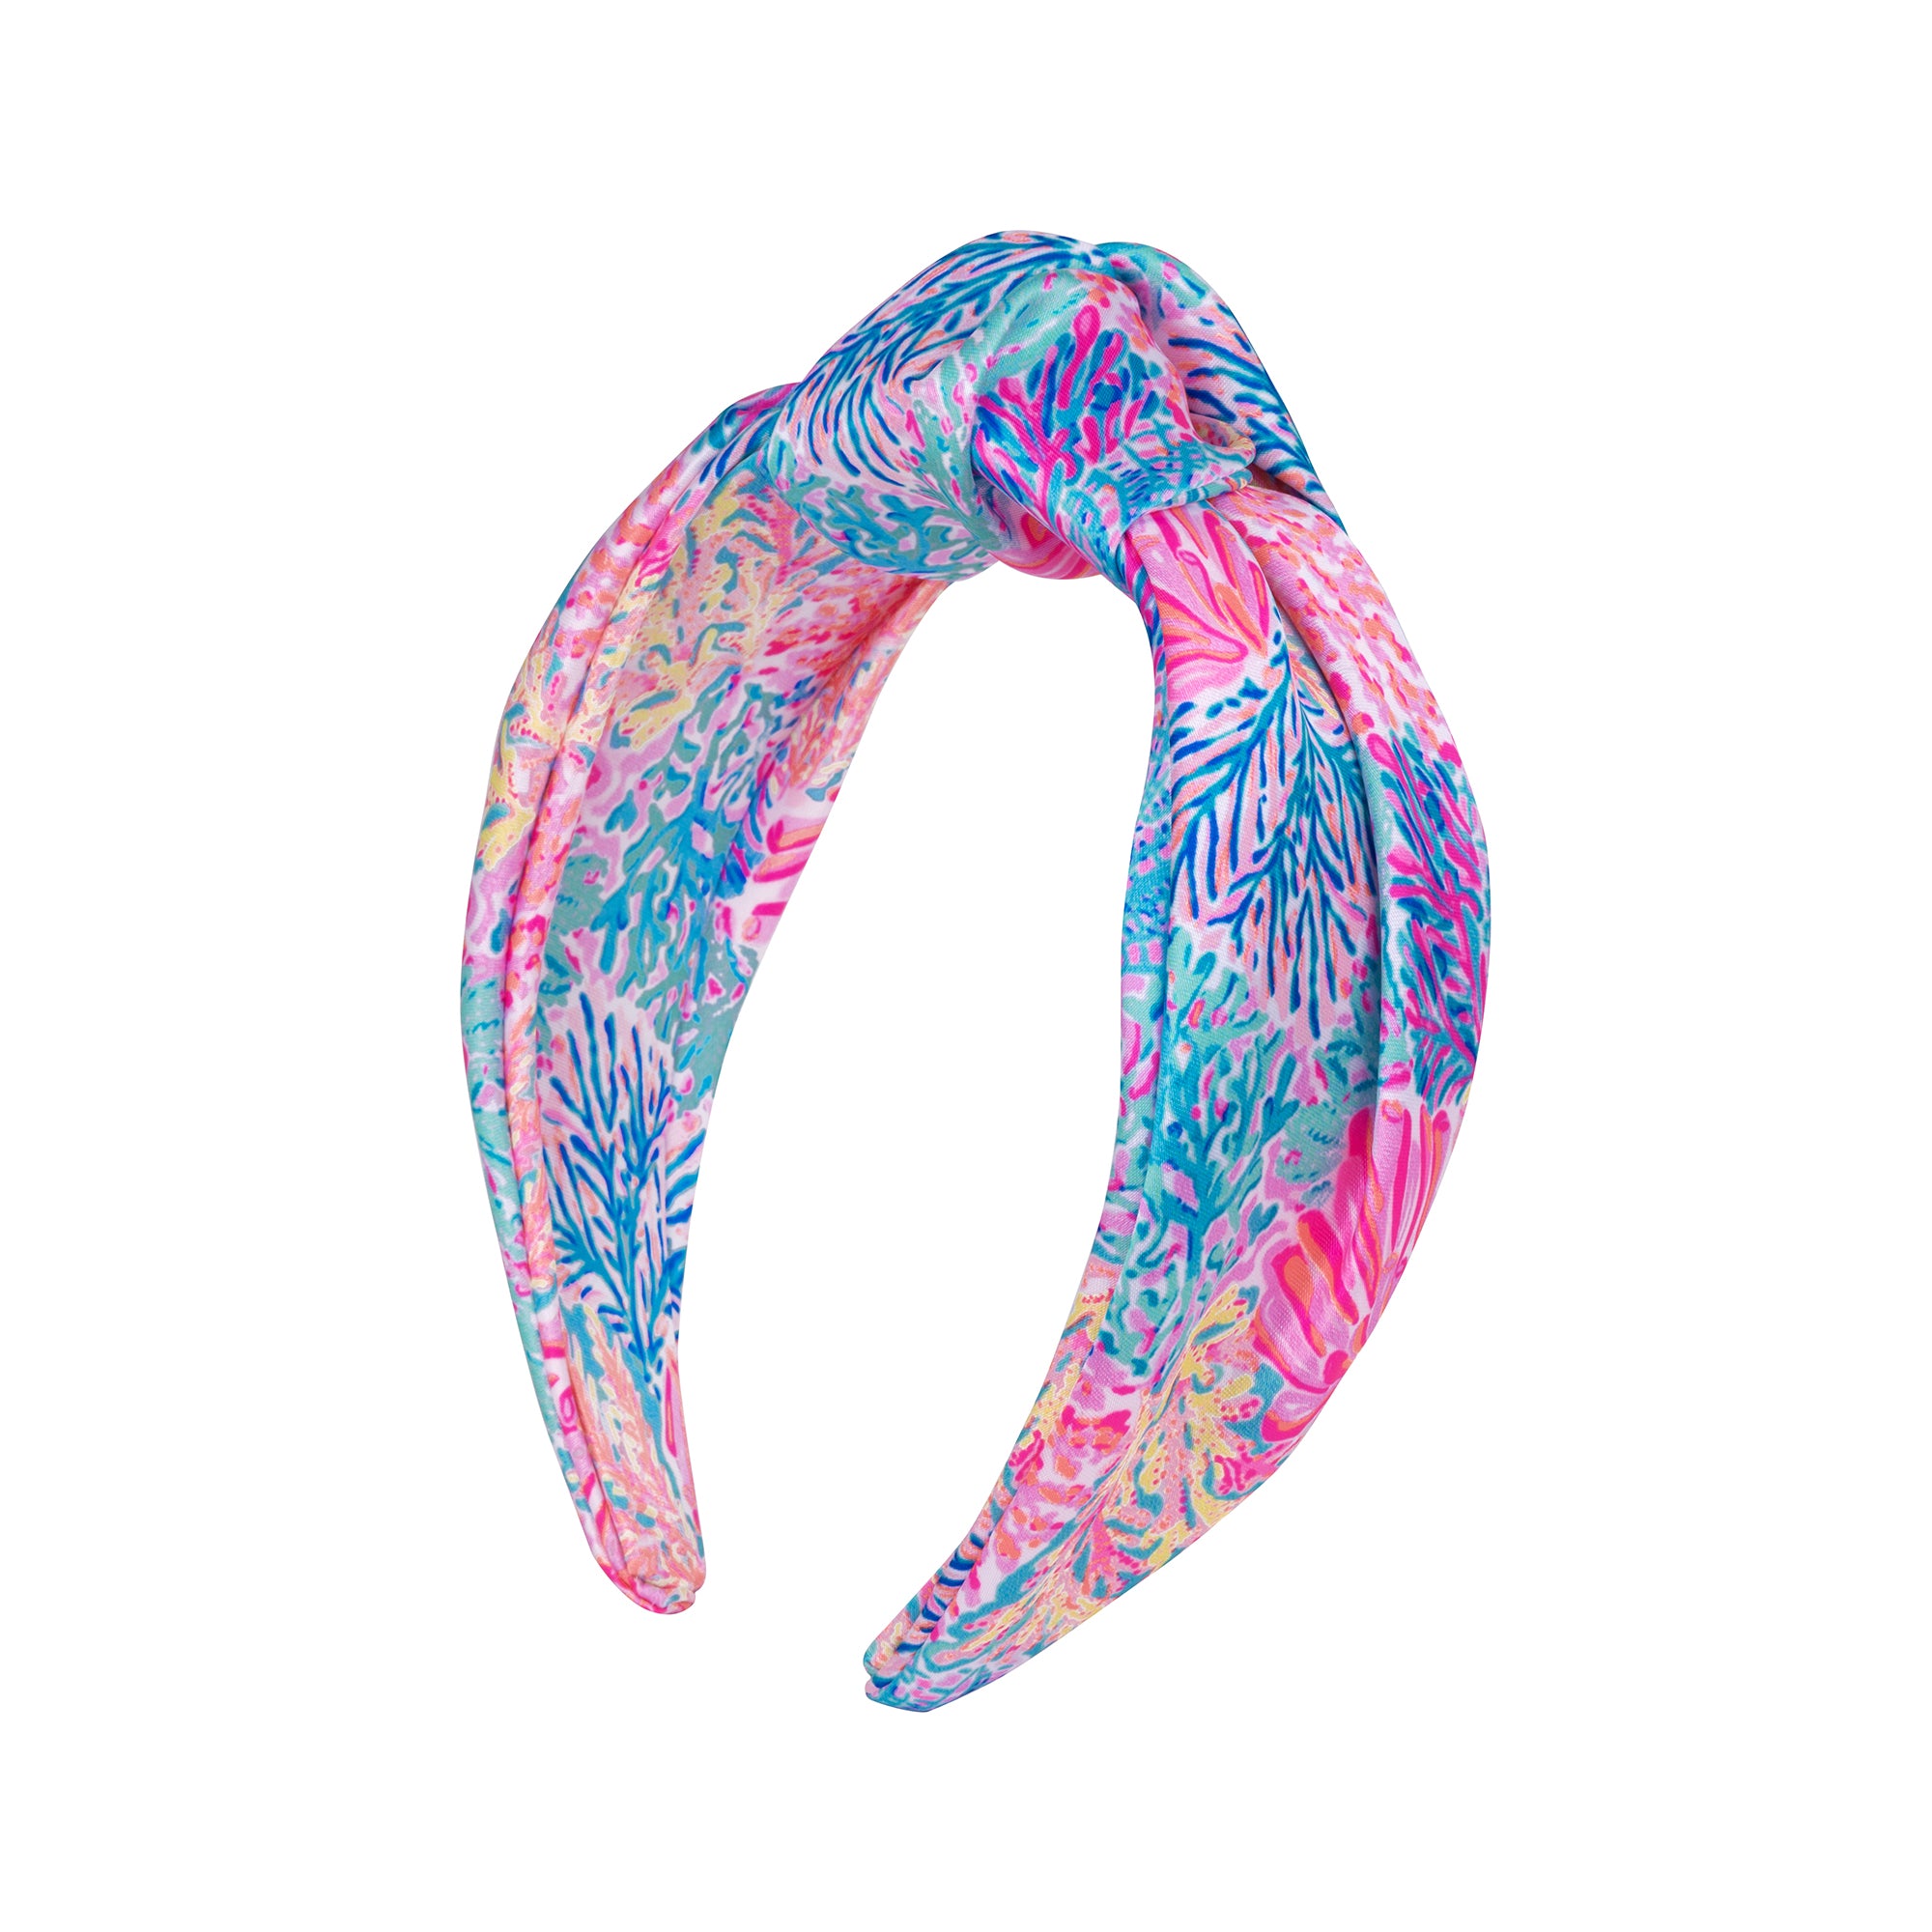 Wide Knotted Headband by Lilly Pulitzer - Splashdance